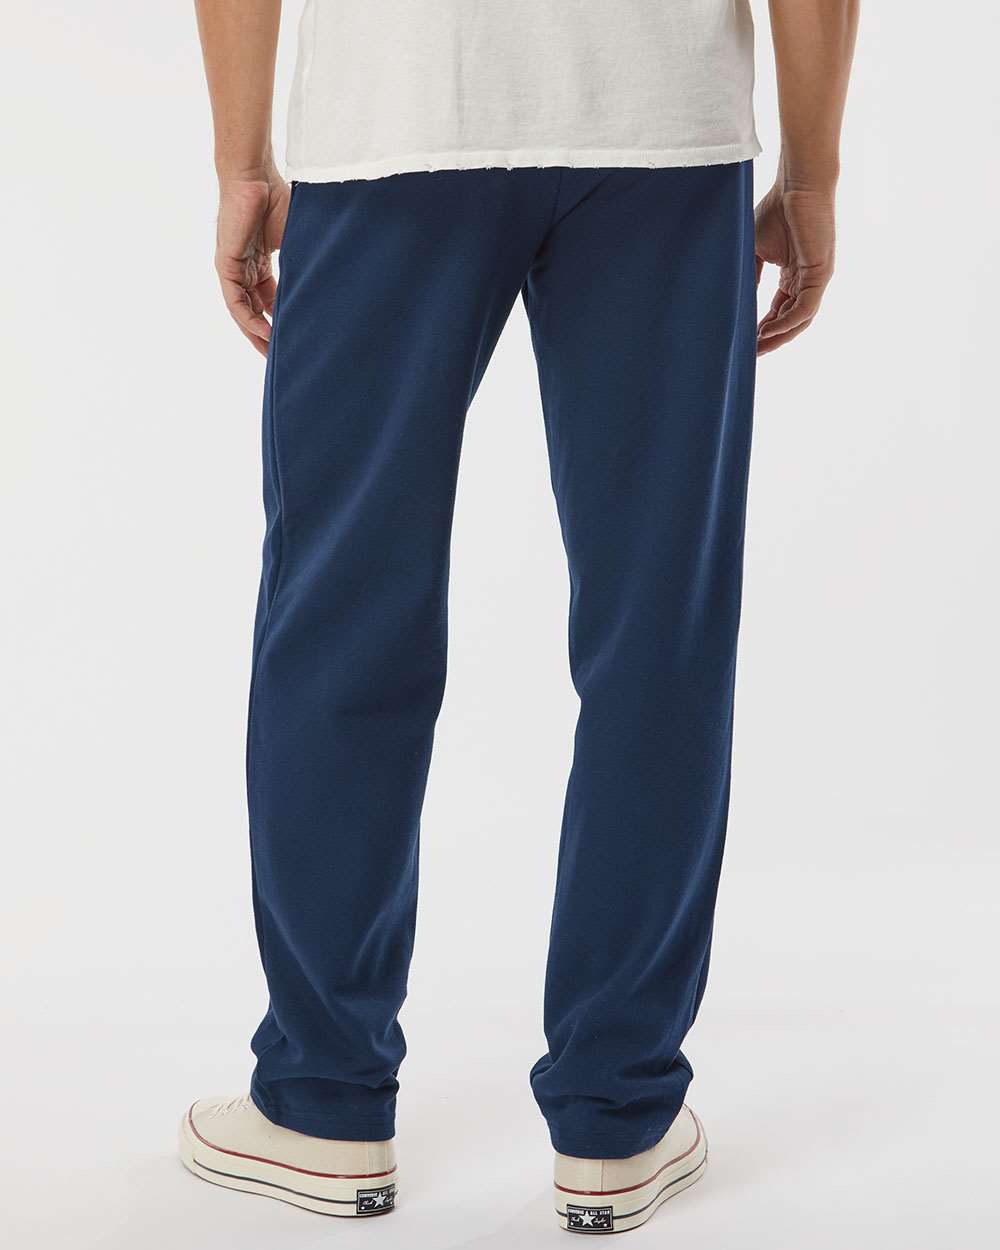 King Fashion Pocketed Open Bottom Sweatpants KF9022 #colormdl_Navy